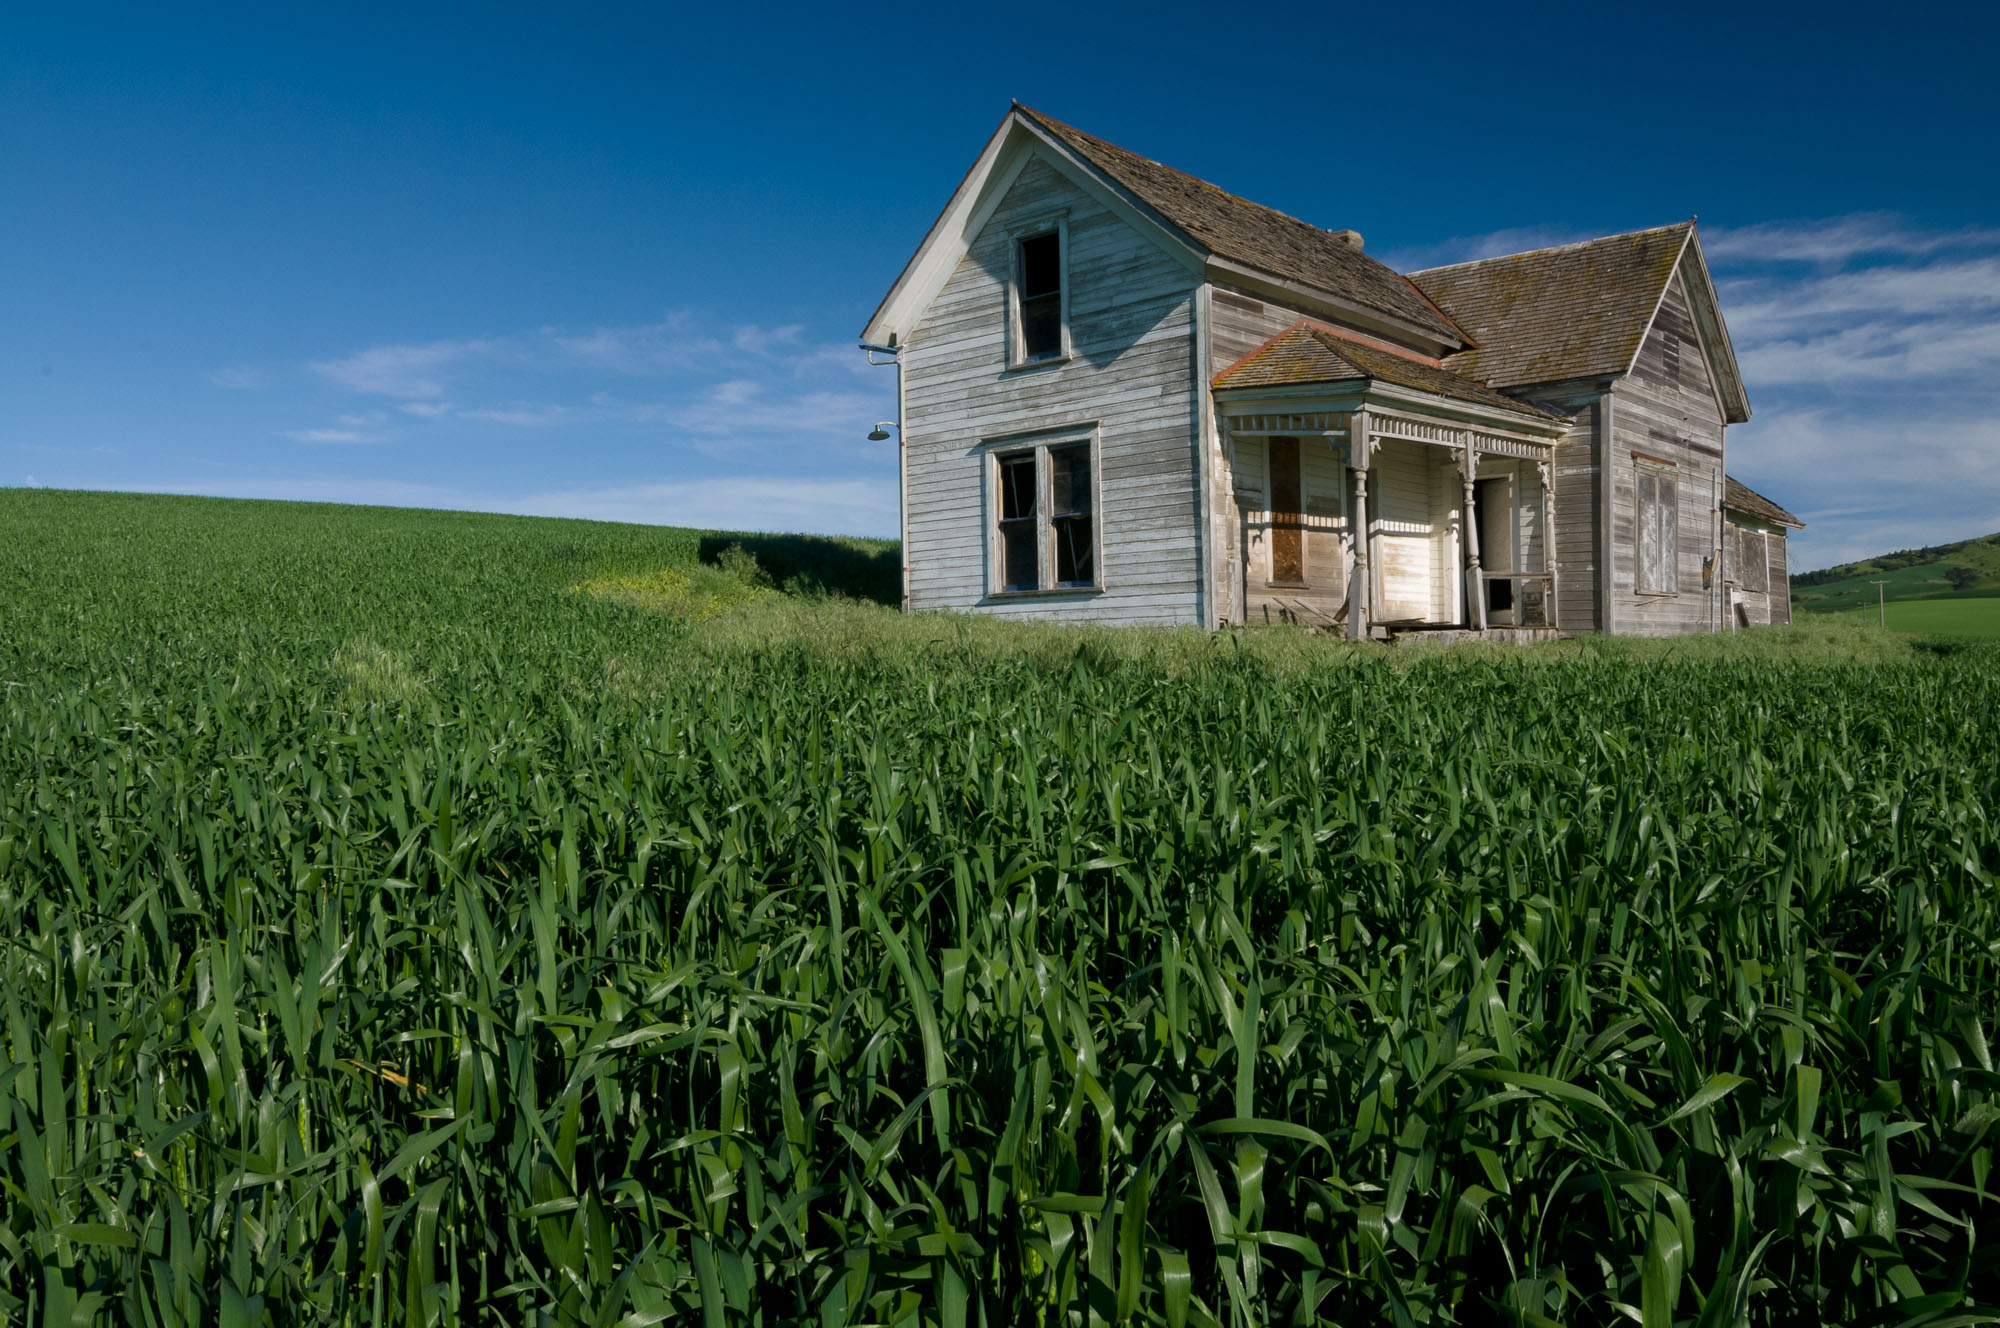 Barbee_100618_3_4464 |  Abandoned house in a wheat field in the Palouse region of south east Washington State.